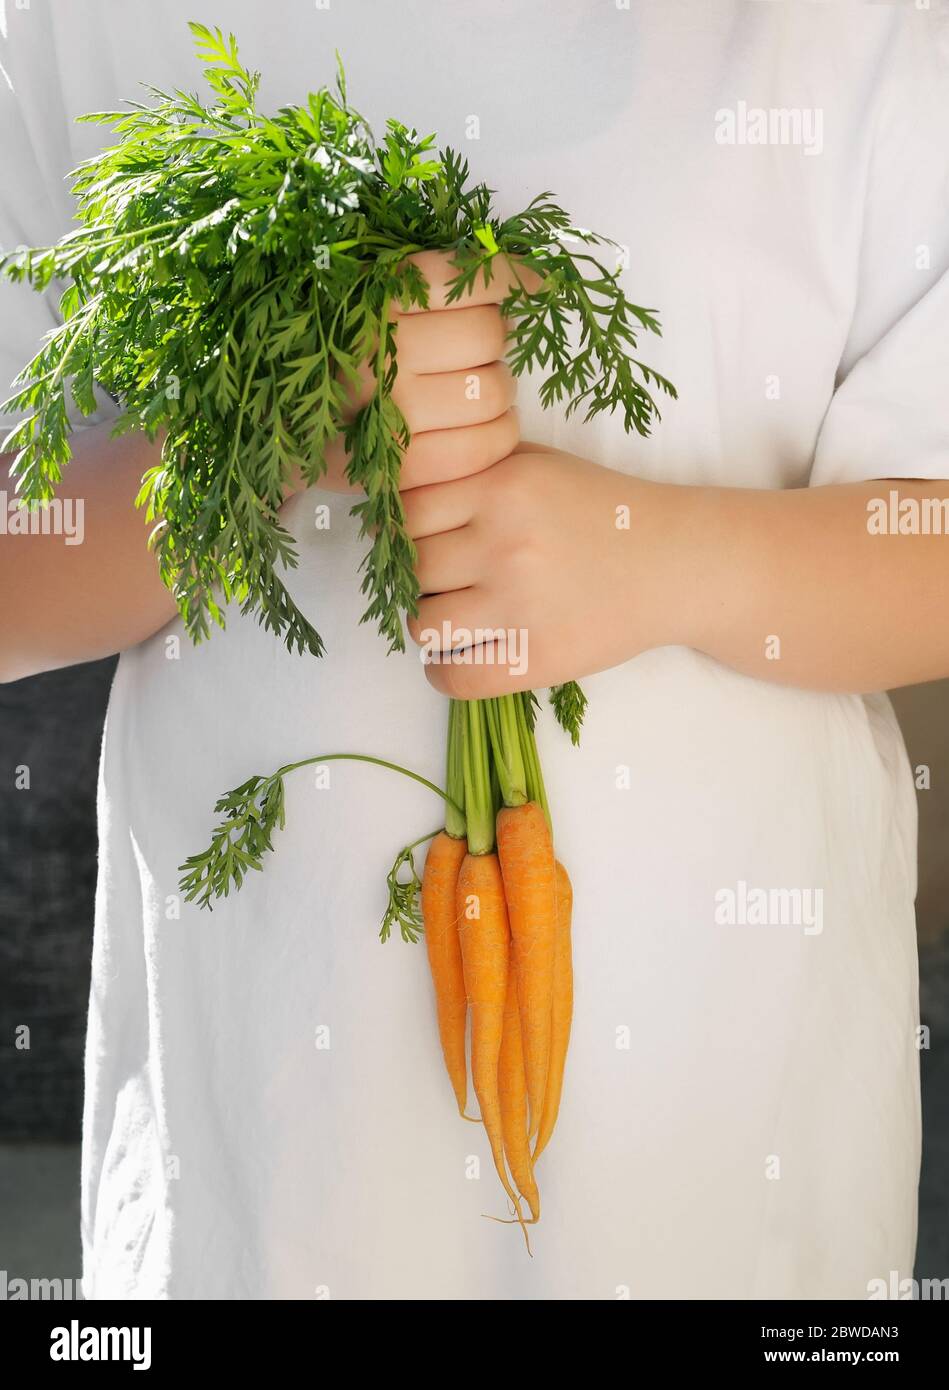 Hand picked fresh bunch of  ecological сarrot. Carrot with leaf.  Healthy organic food.Vertical orientation. Stock Photo